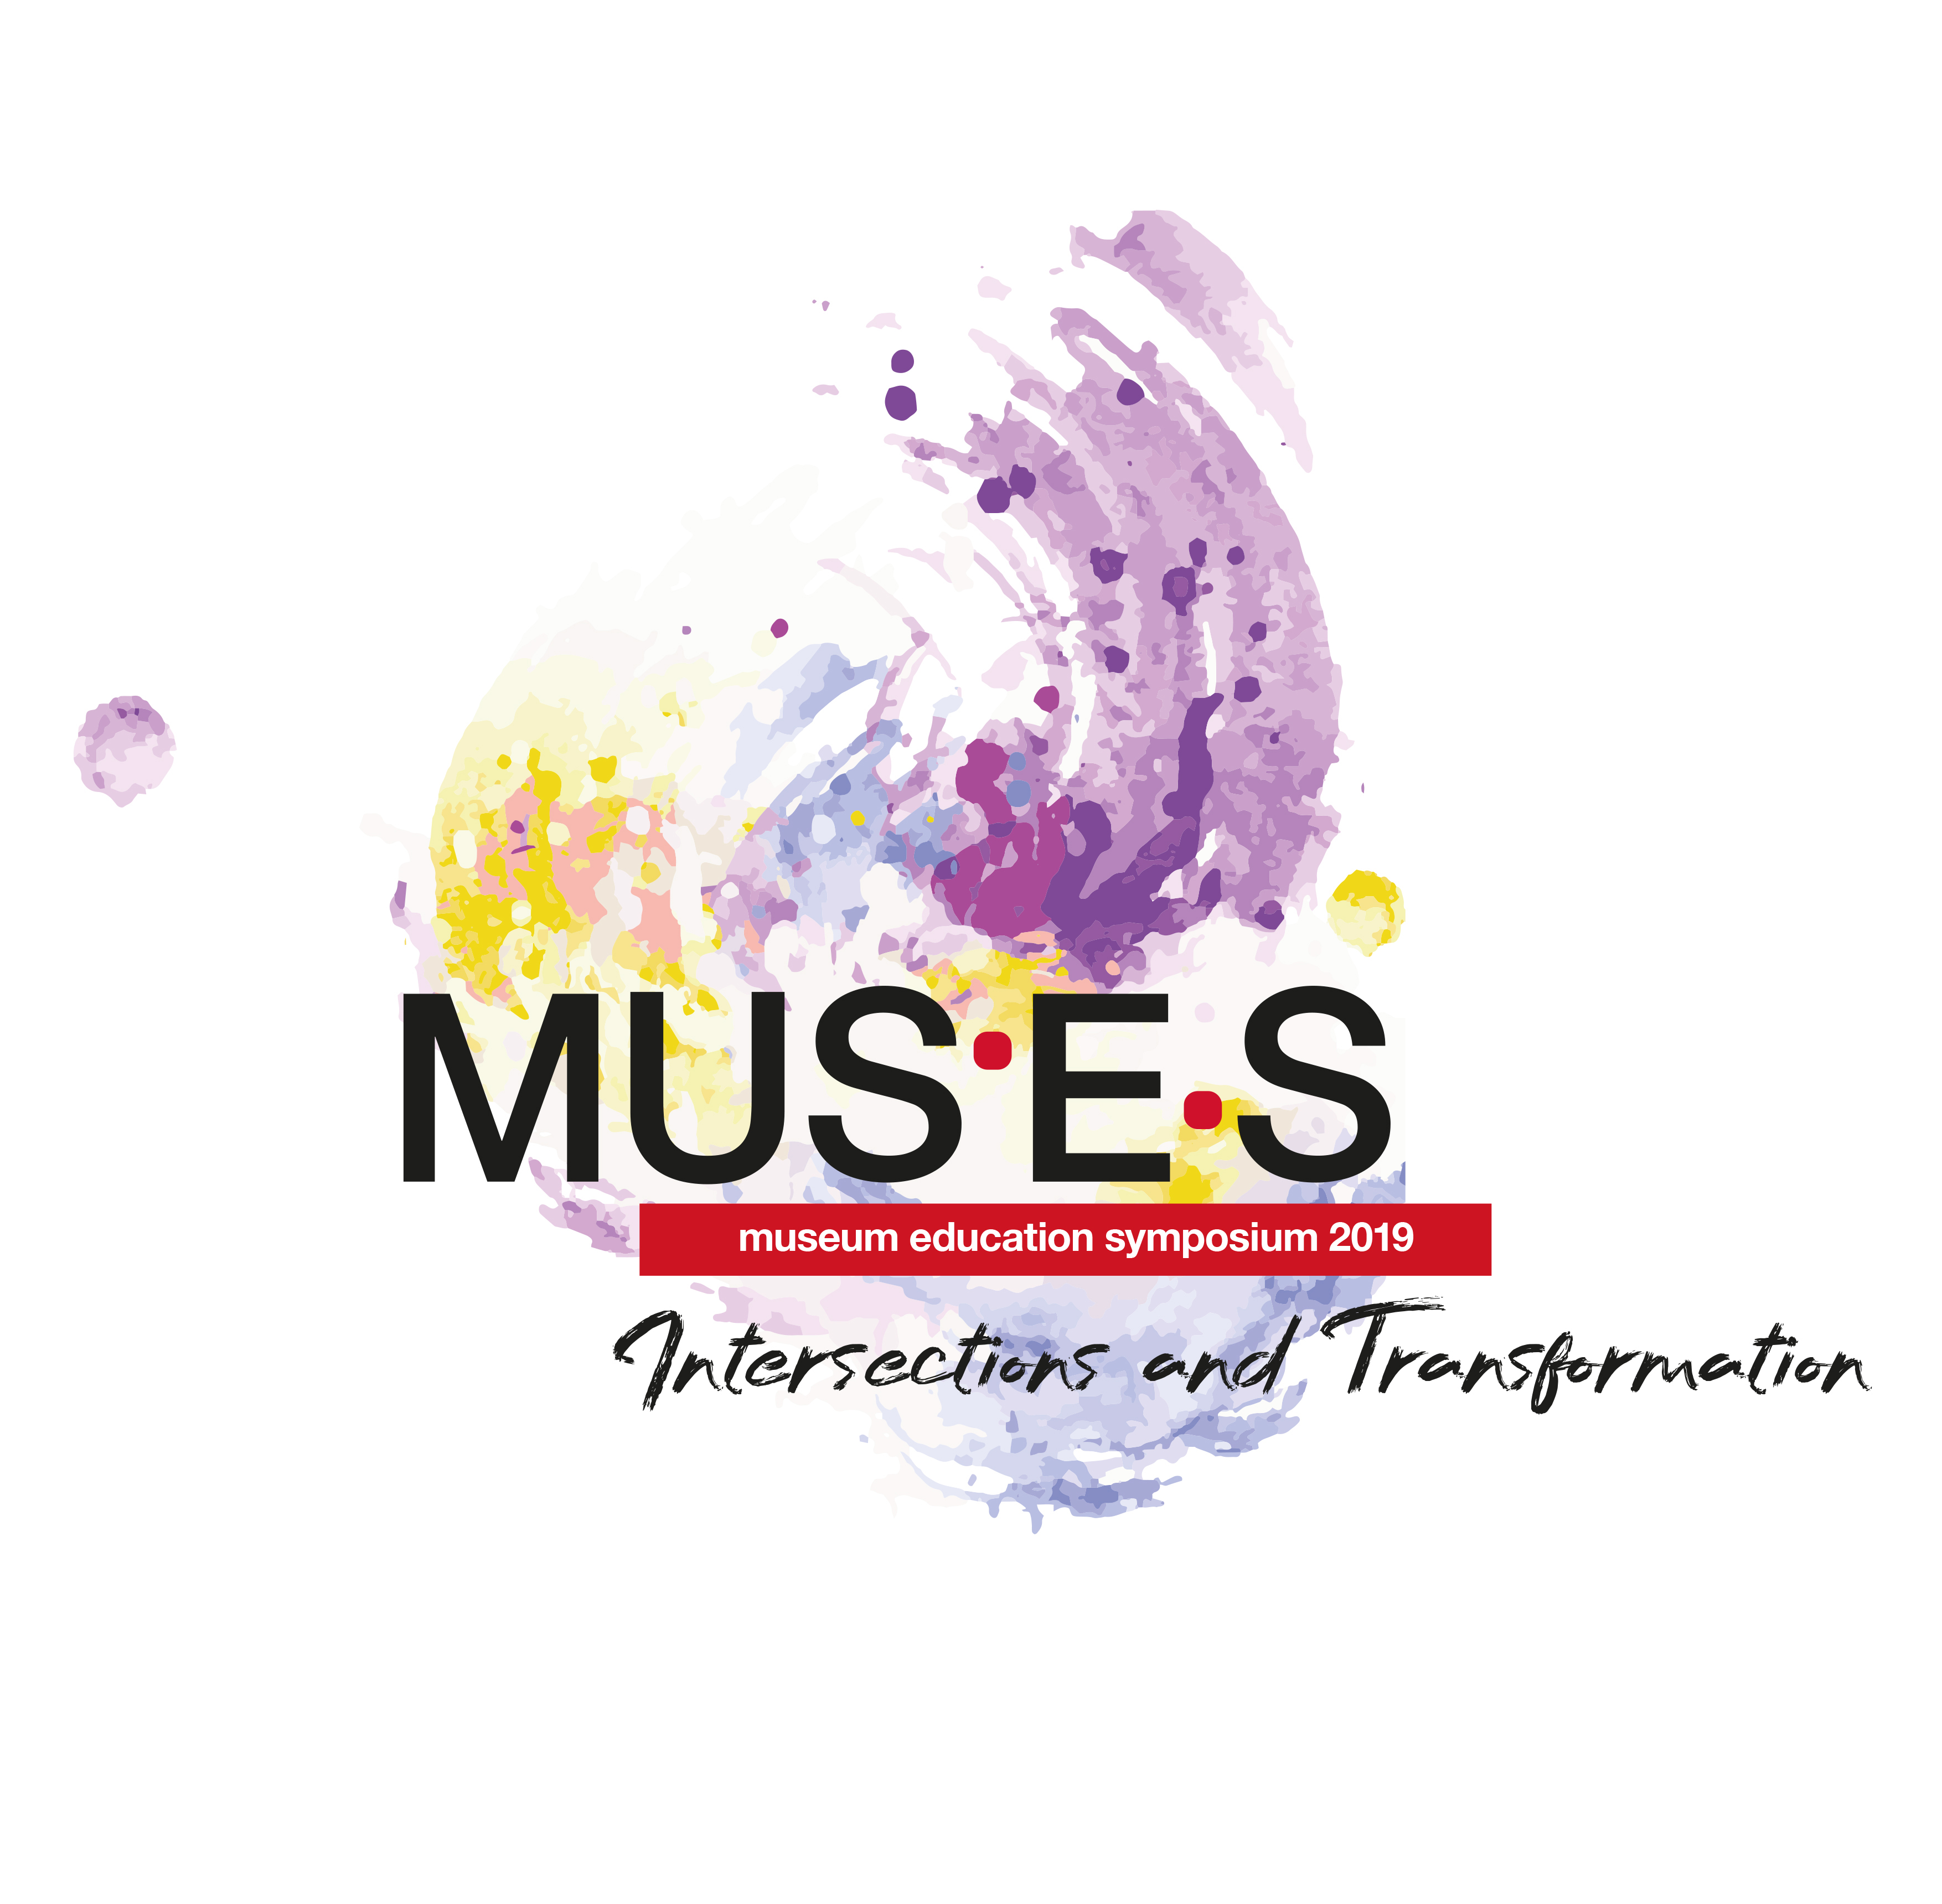 5.2.3 MUSES 4